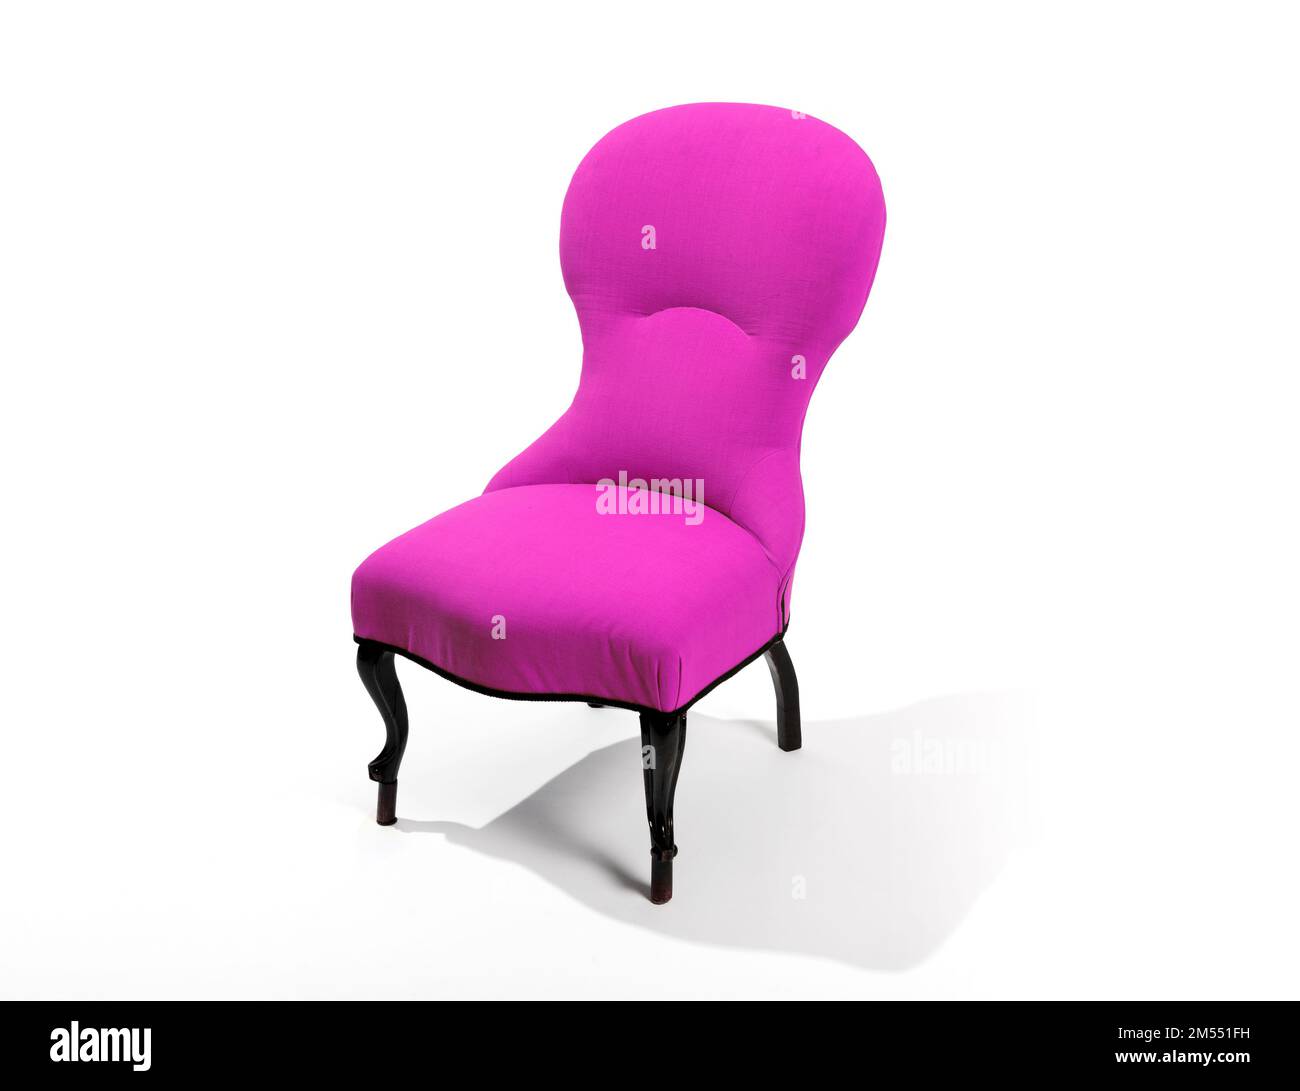 Comfortable retro chair with bright fuchsia upholstery and black legs located against white background Stock Photo